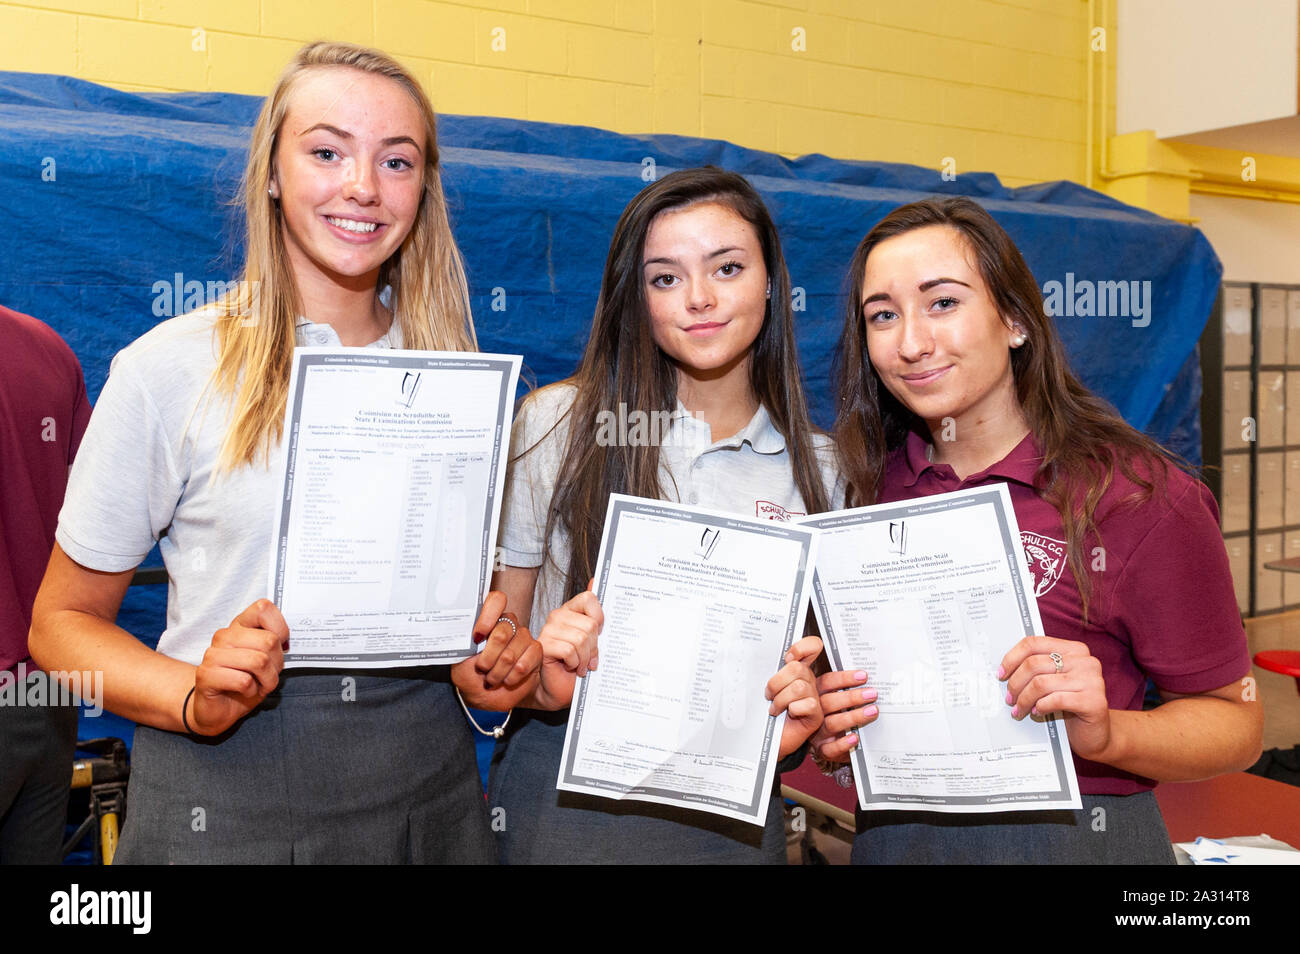 Schull, West Cork, Ireland. 4th Oct, 2019. Over 64,000 students around Ireland received their Junior Cert results this afternoon. In Schull Community College, West Cork, many students were beside themselves with happiness on seeing their results. Saidbhe Cullen Quinn, Schull, Mona Collins, Schull and Caitlin O'Sullivan, Schull were pleased with their results. Credit: Andy Gibson/Alamy Live News. Stock Photo